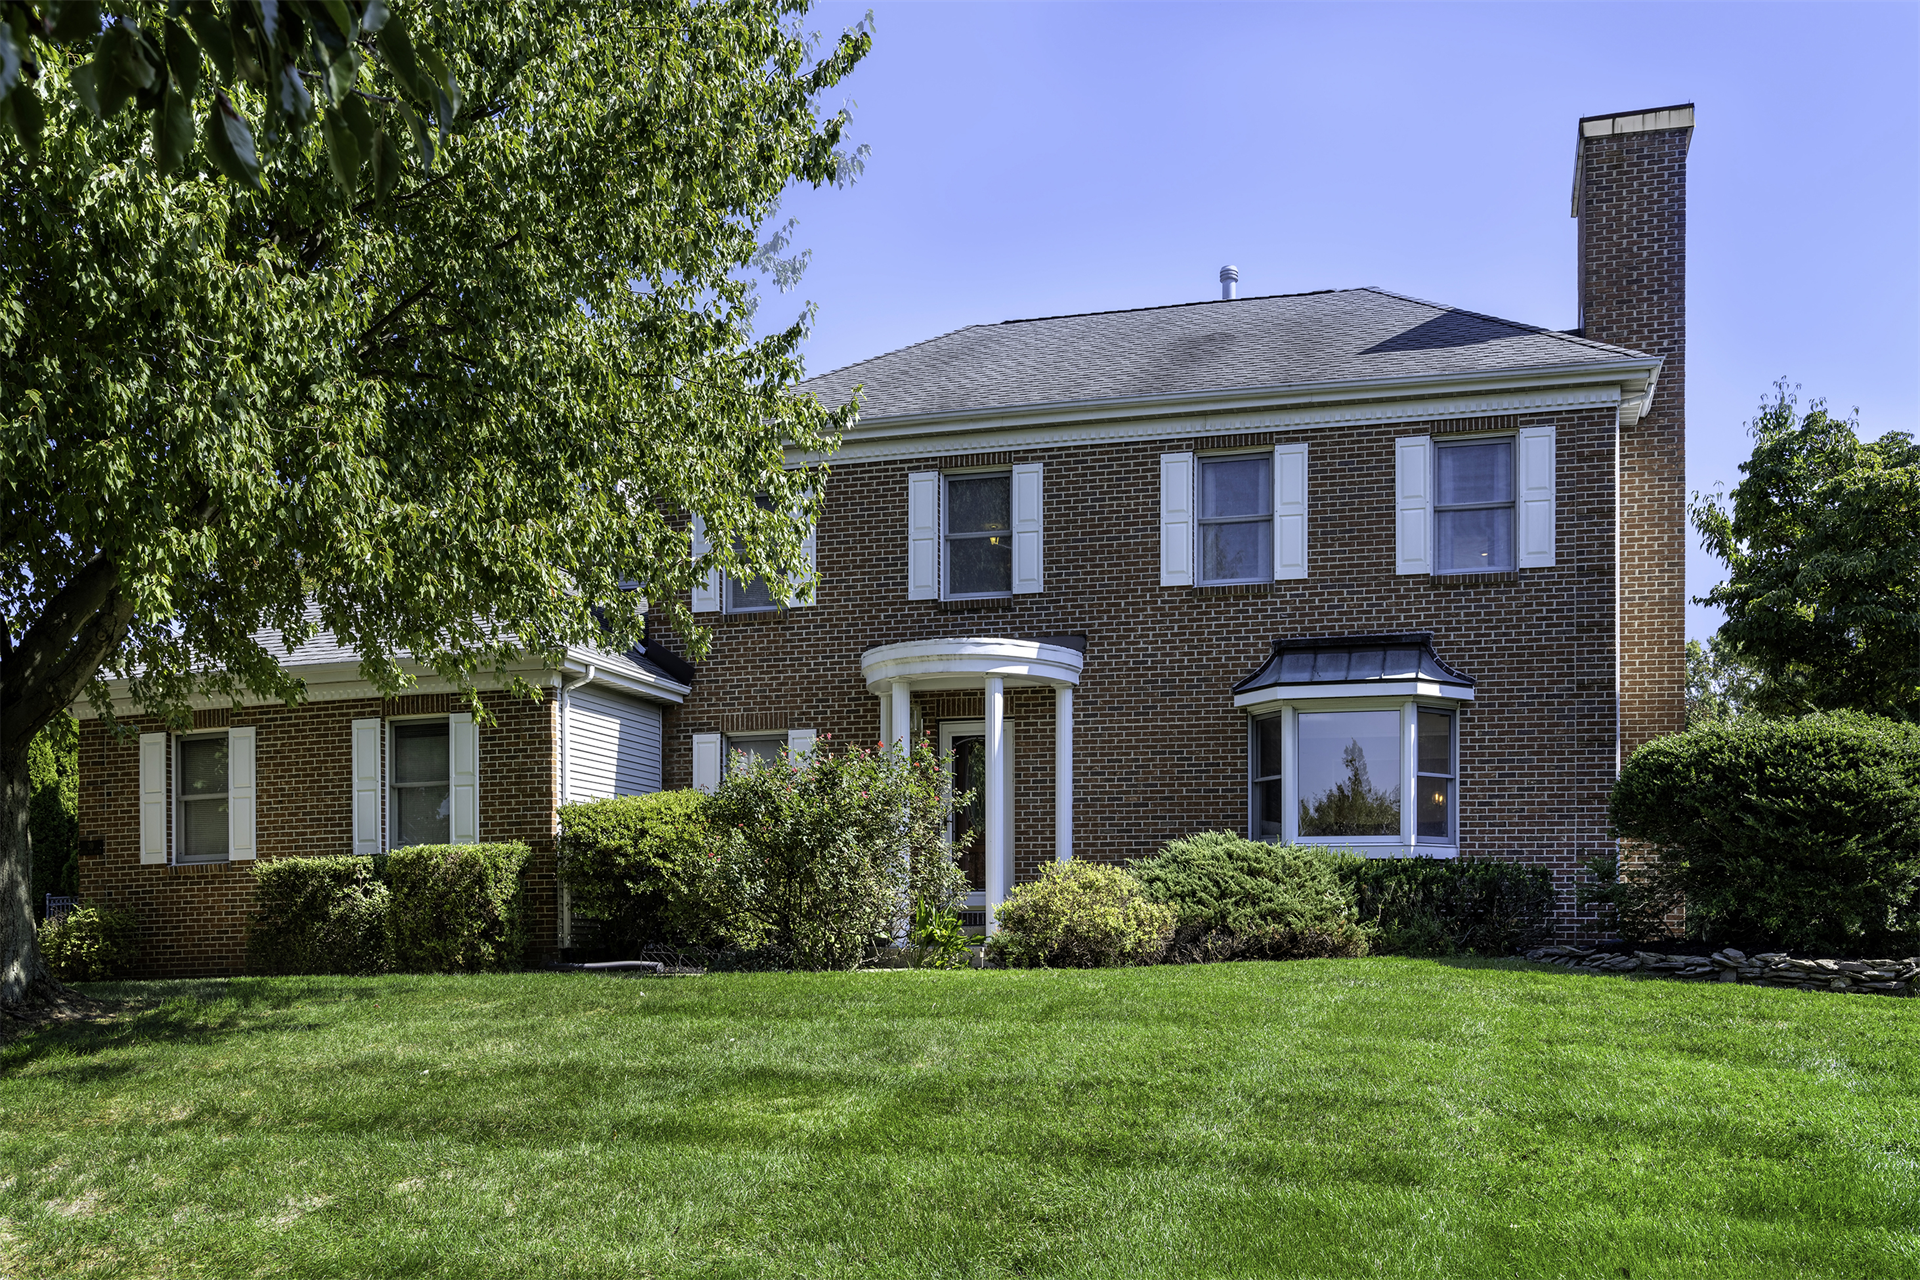 Single Family at West Windsor, New Jersey United States